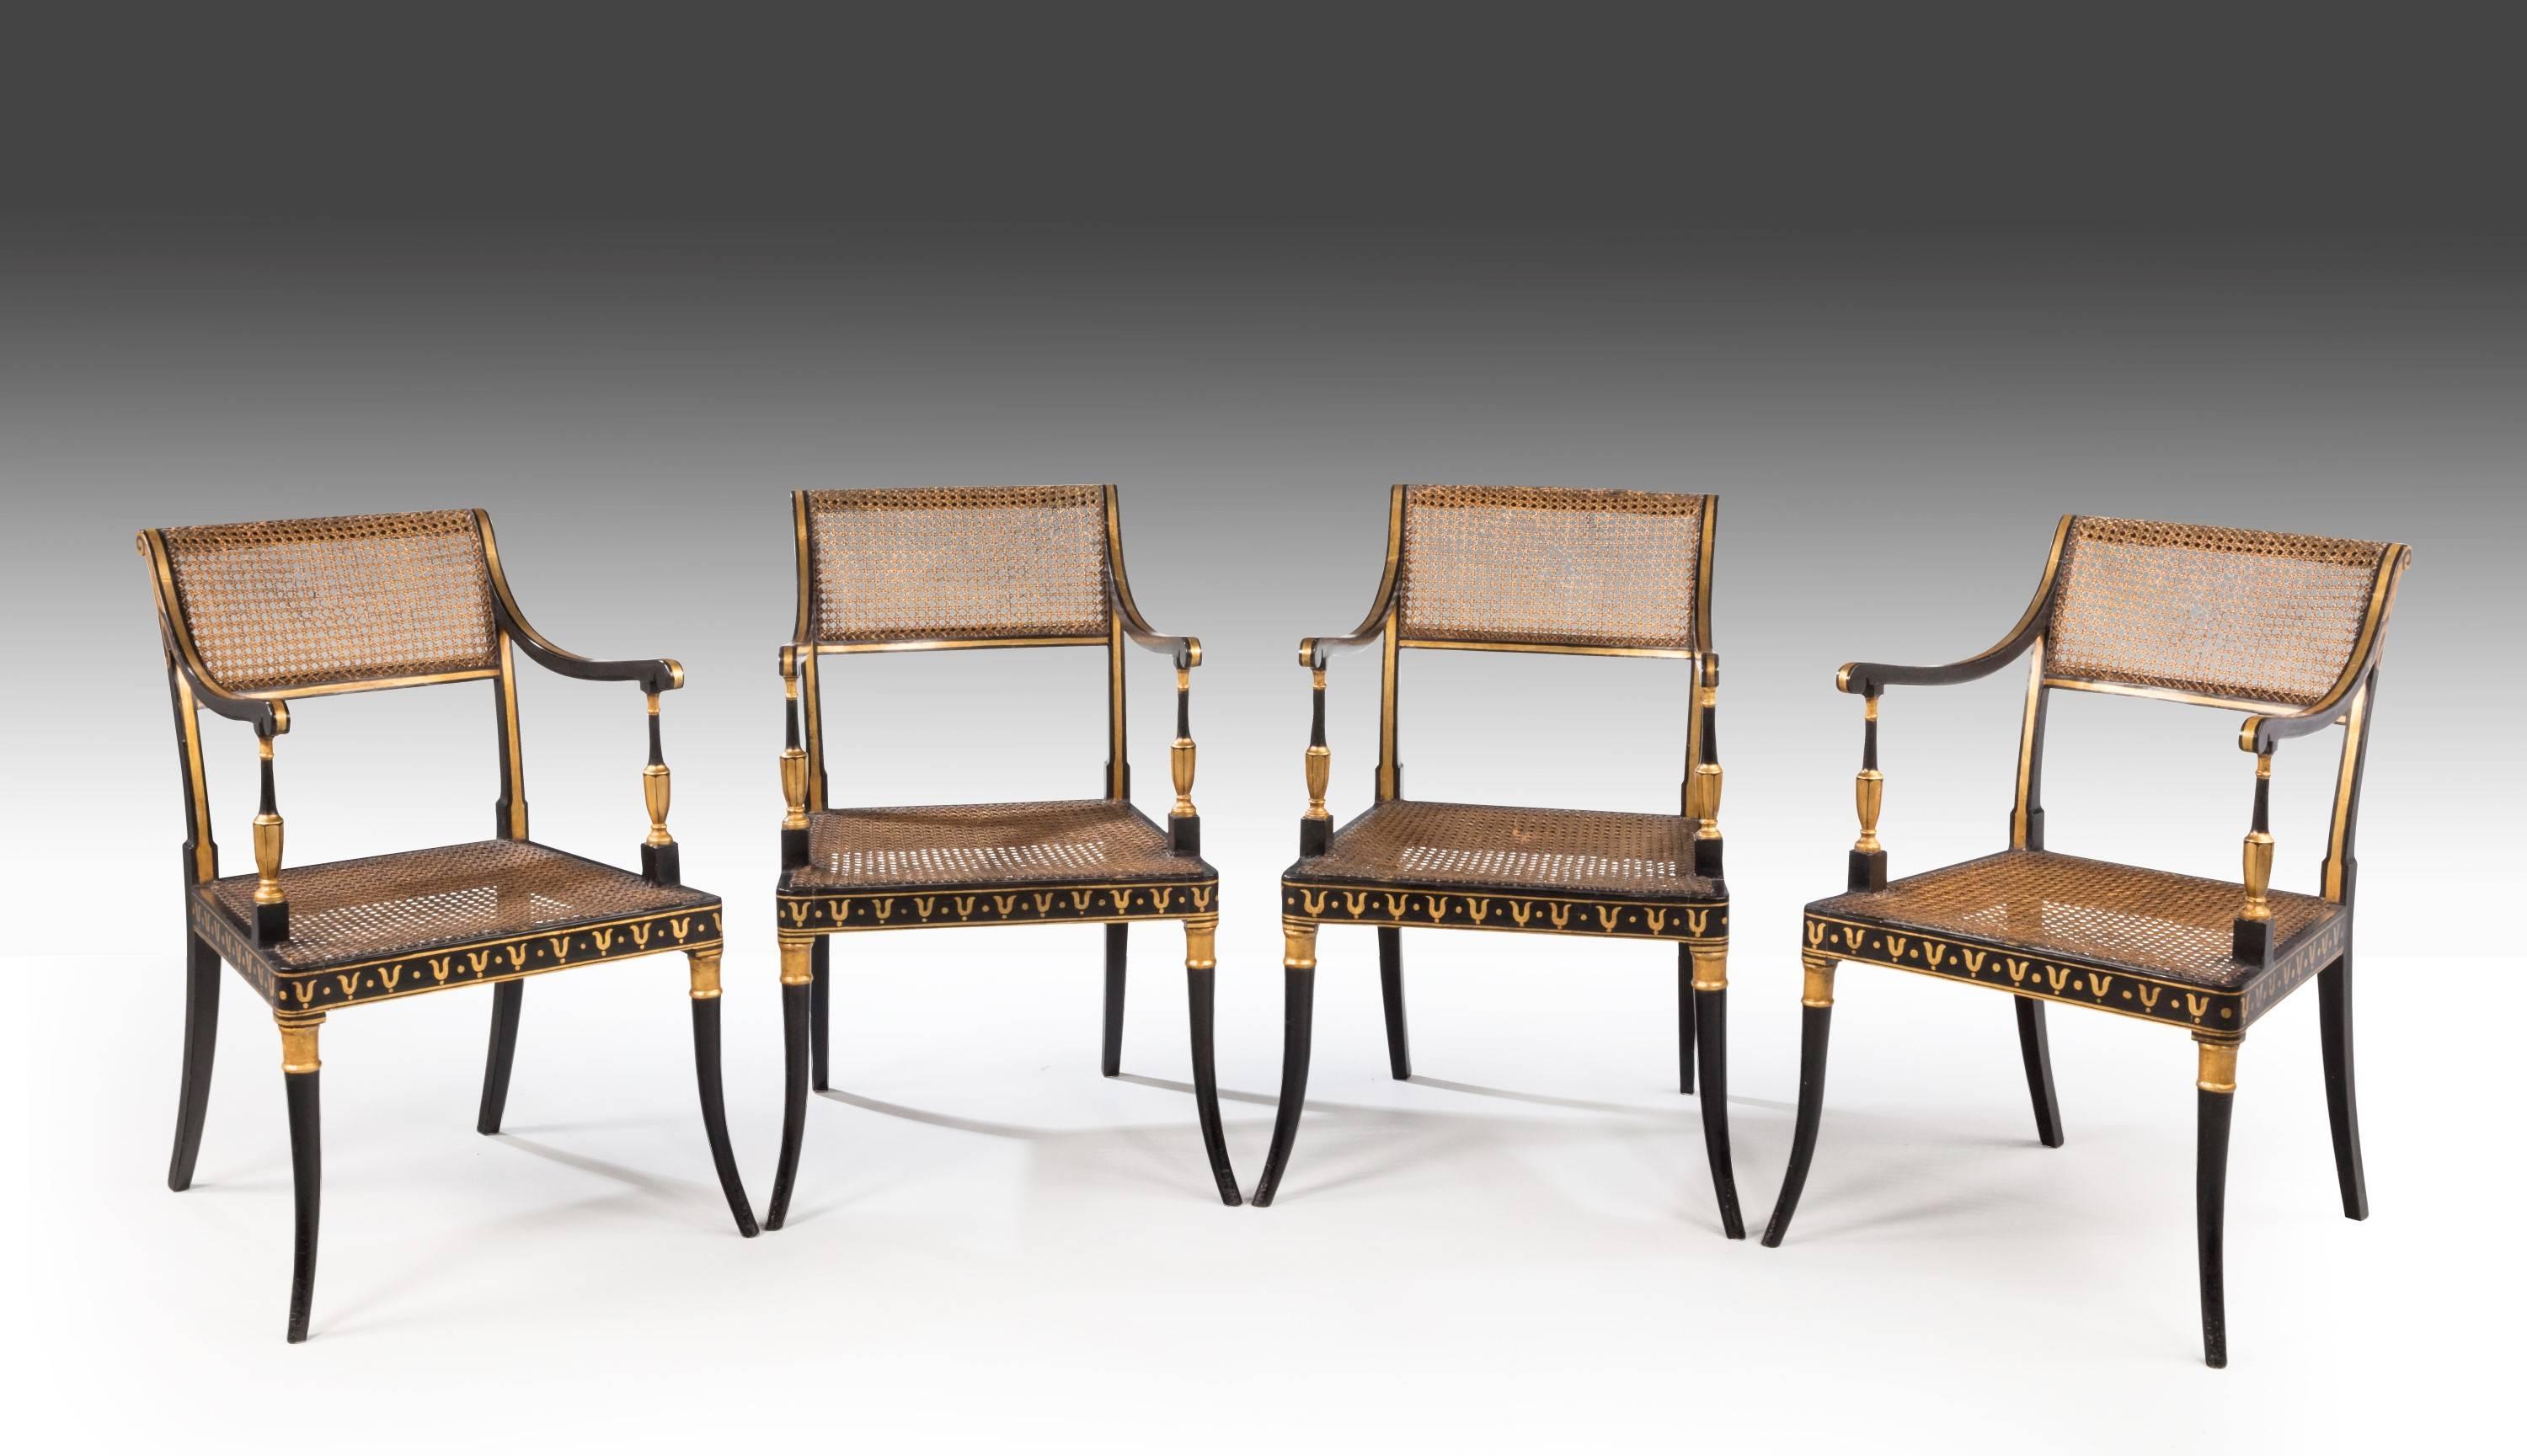 A very good set of four Regency period lacquered and parcel-gilt elbow chairs of fine line. Retaining the original canework. The gilding slightly restored particularly on the arms and the front bearer.

Measures: Seat height 19 inches.